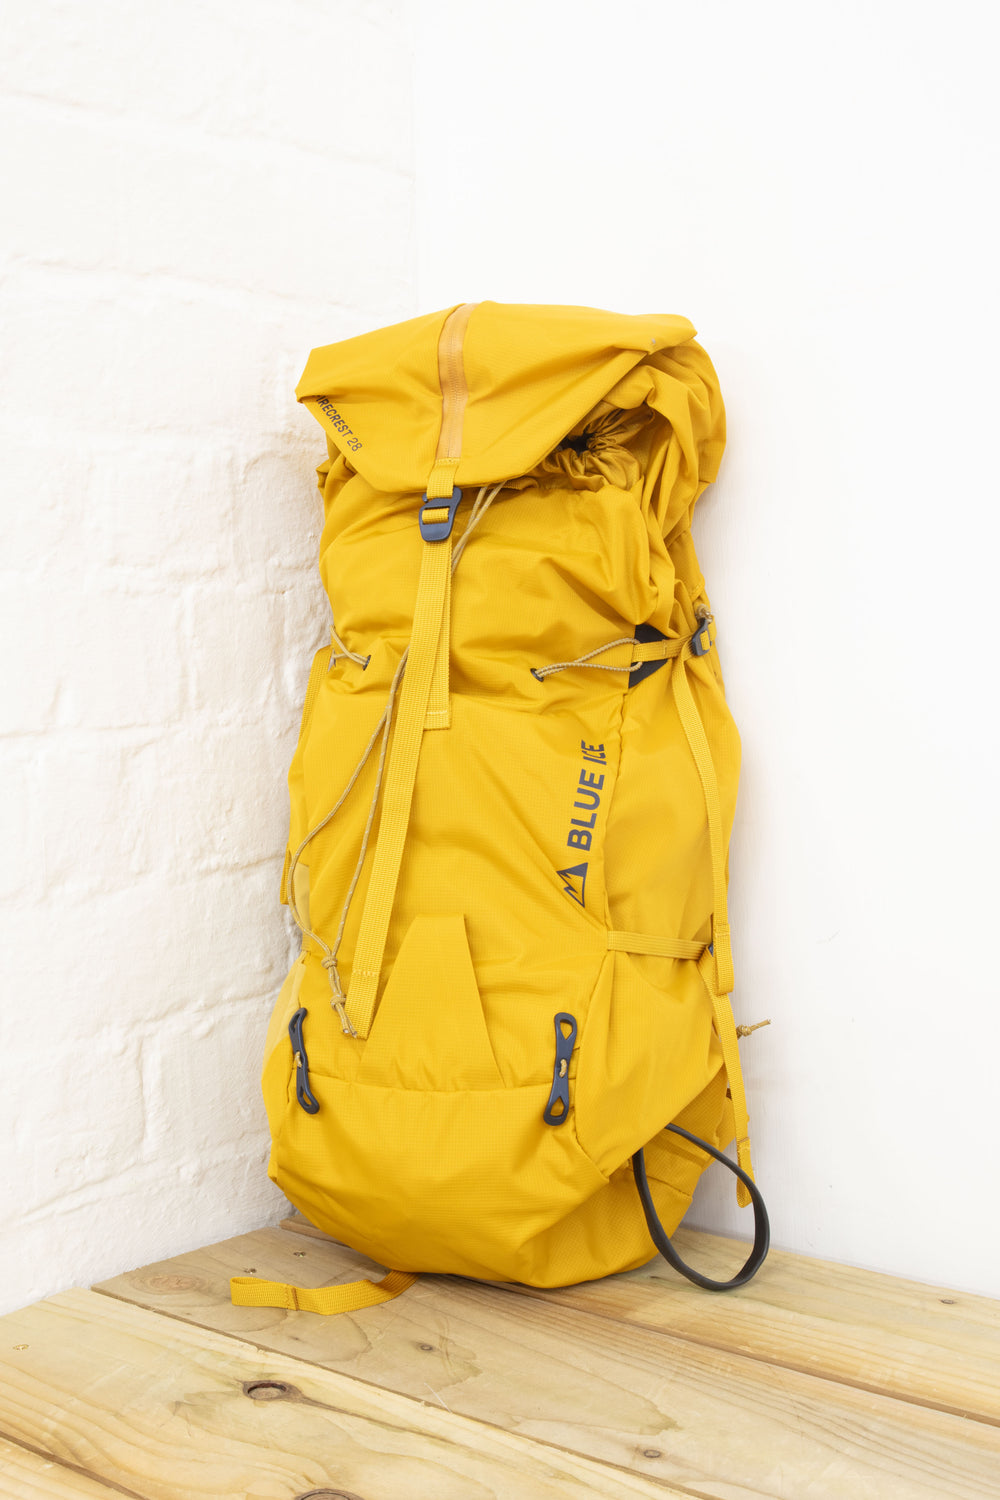 Blue Ice - Firecrest 28L Pack